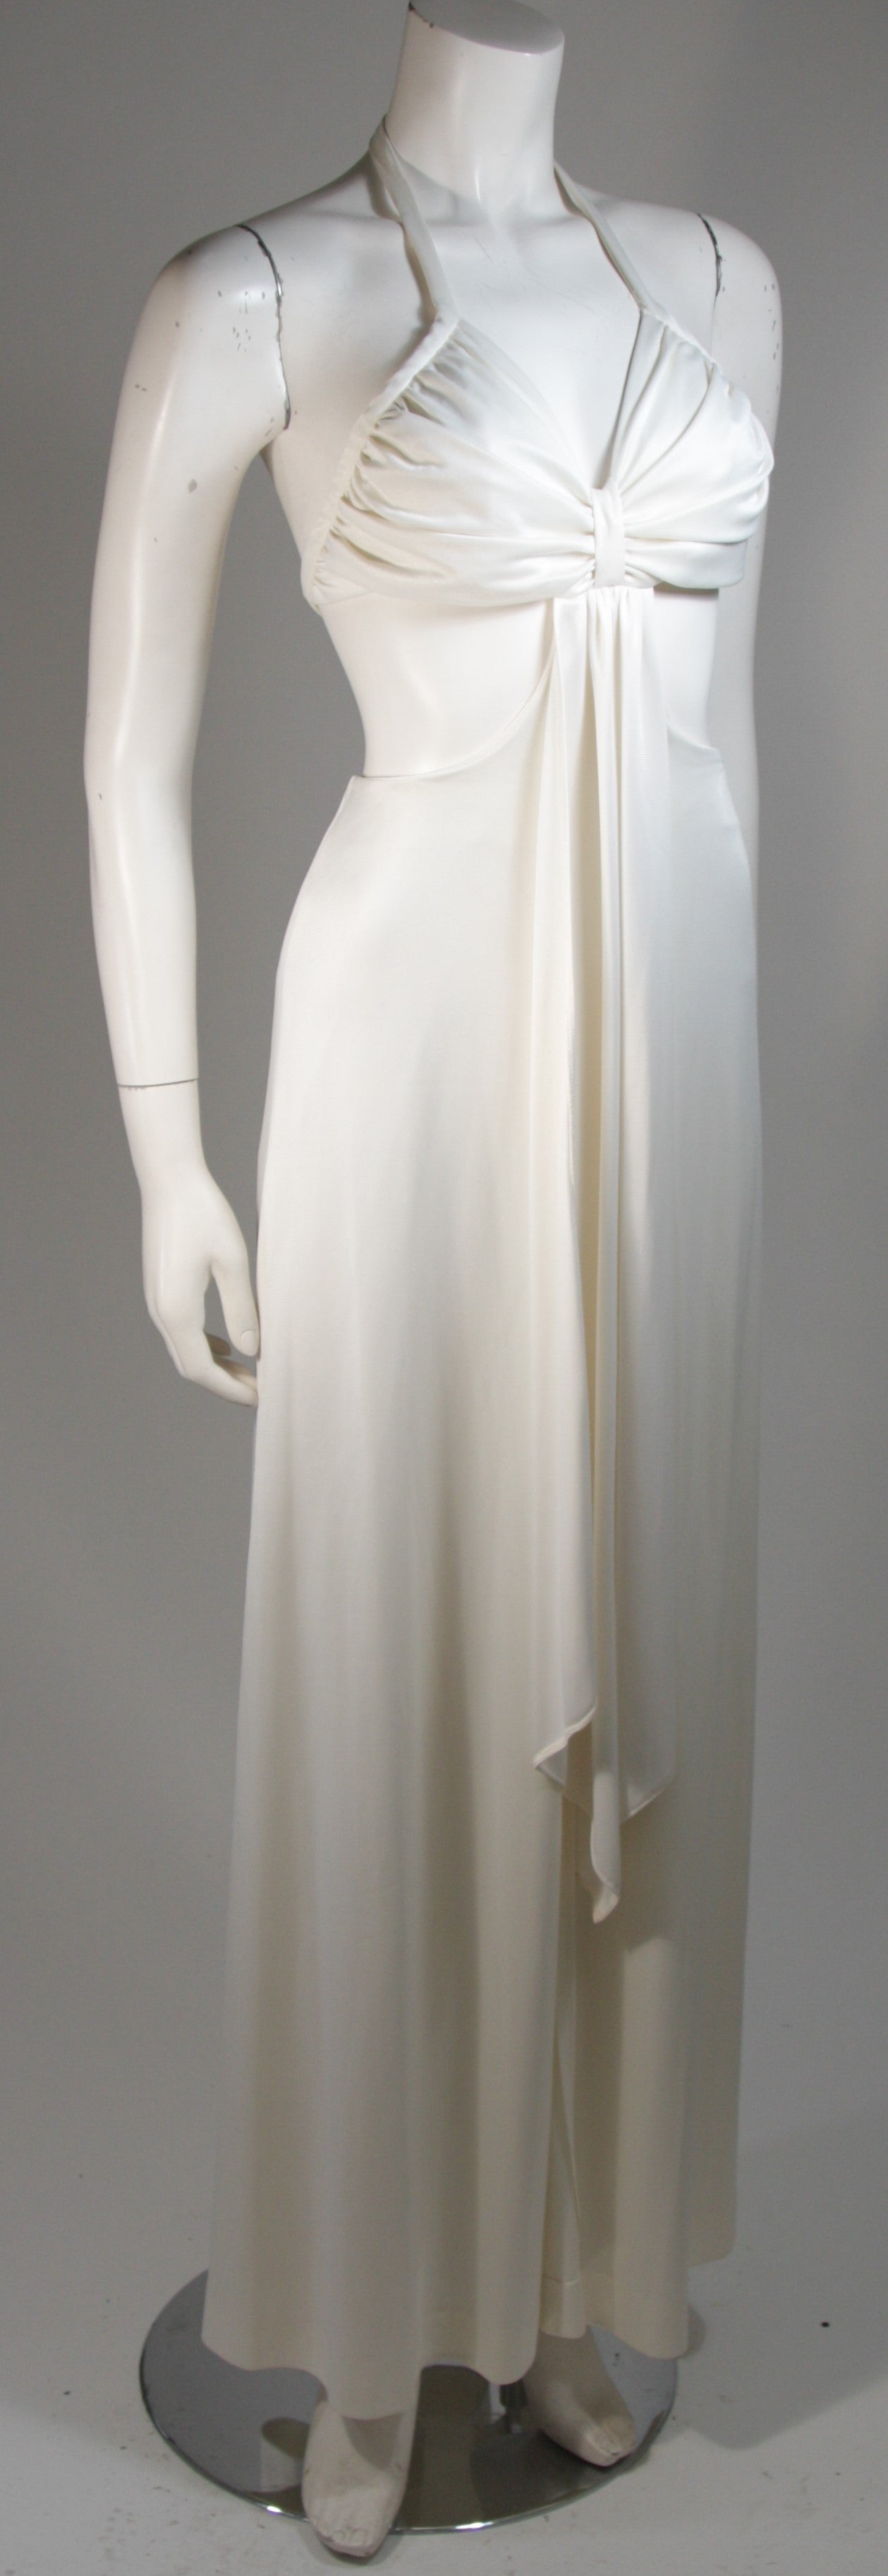 Gray Funky 1970's White Draped Jersey Gown with Exposed Sides Size Small